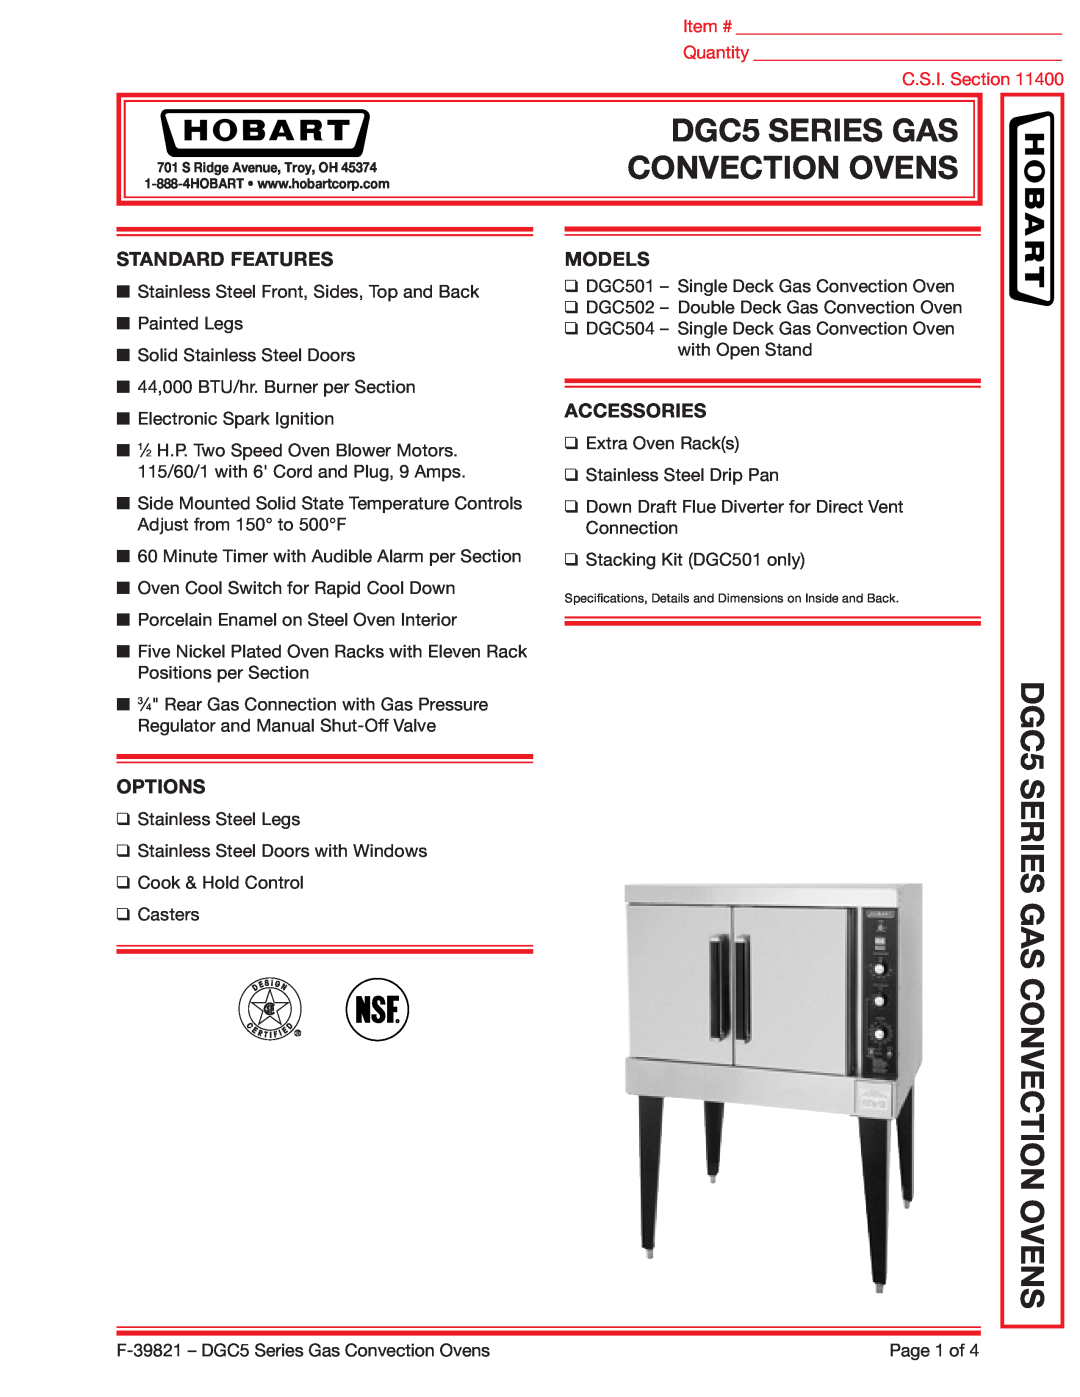 Hobart DGC504 specifications Convection Ovens, DGC5 SERIES GAS CONVECTION OVENS, Standard Features, Options, Models 